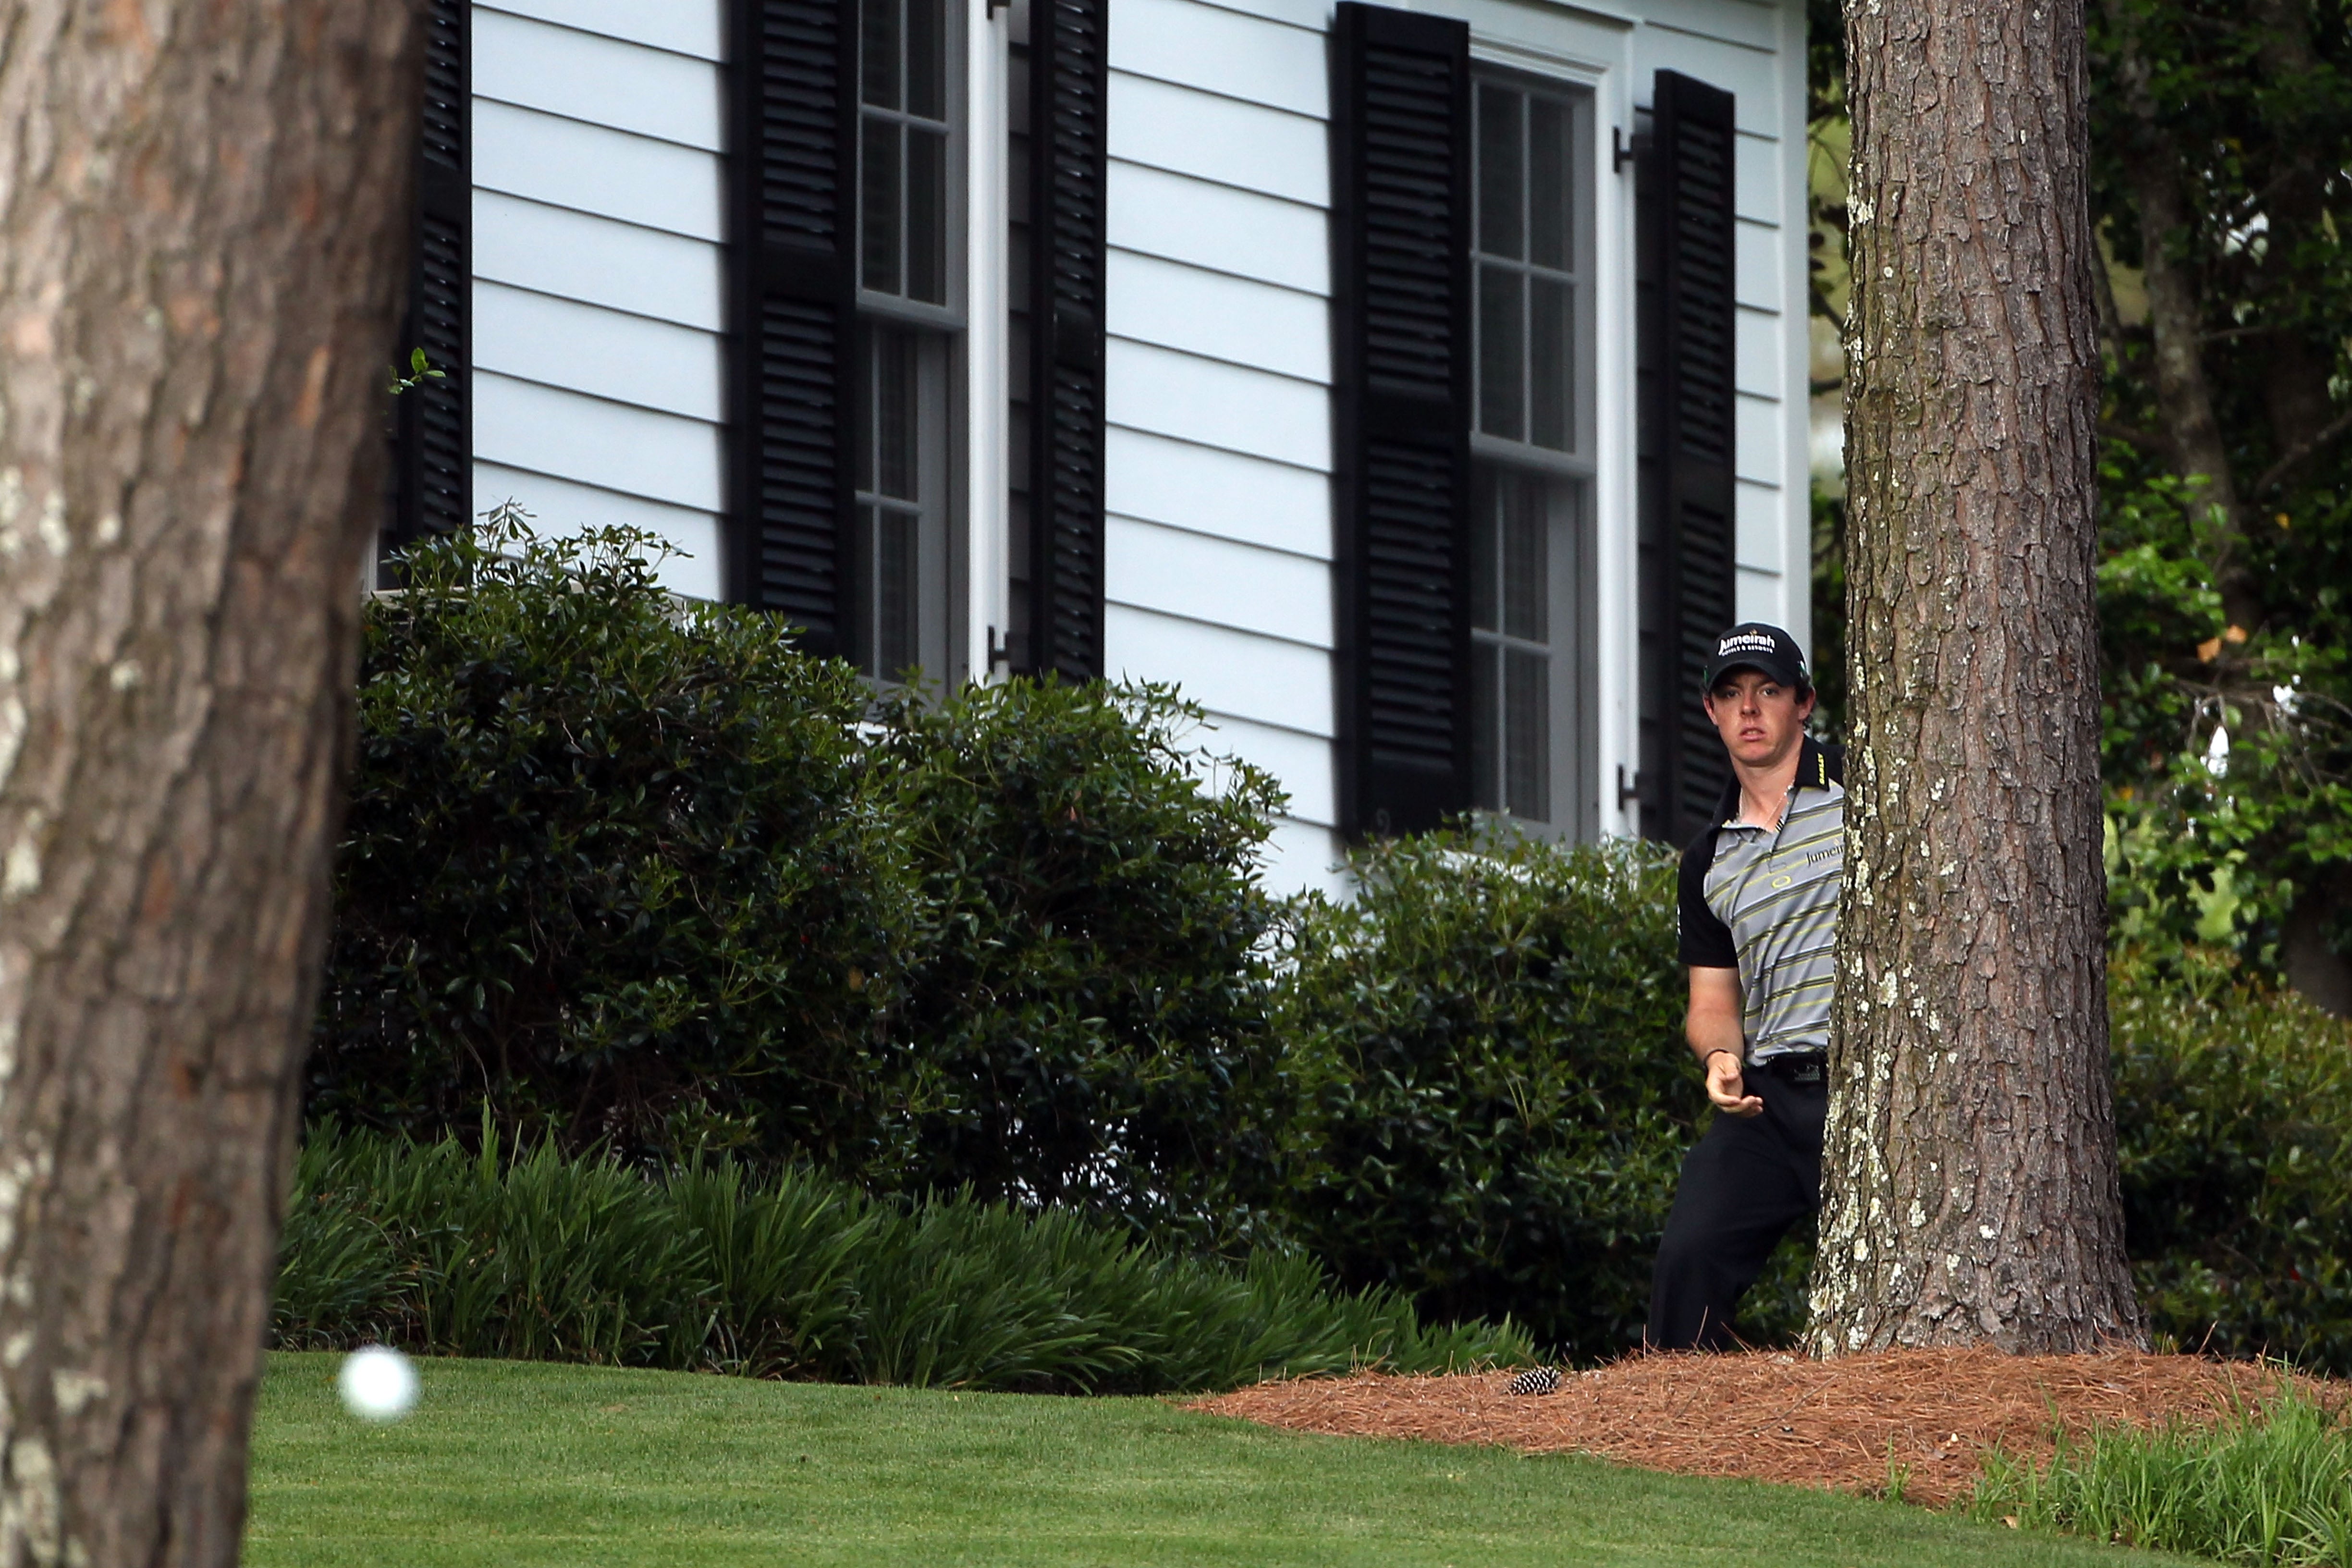 McIlroy endured an infamous collapse at the 2011 Masters